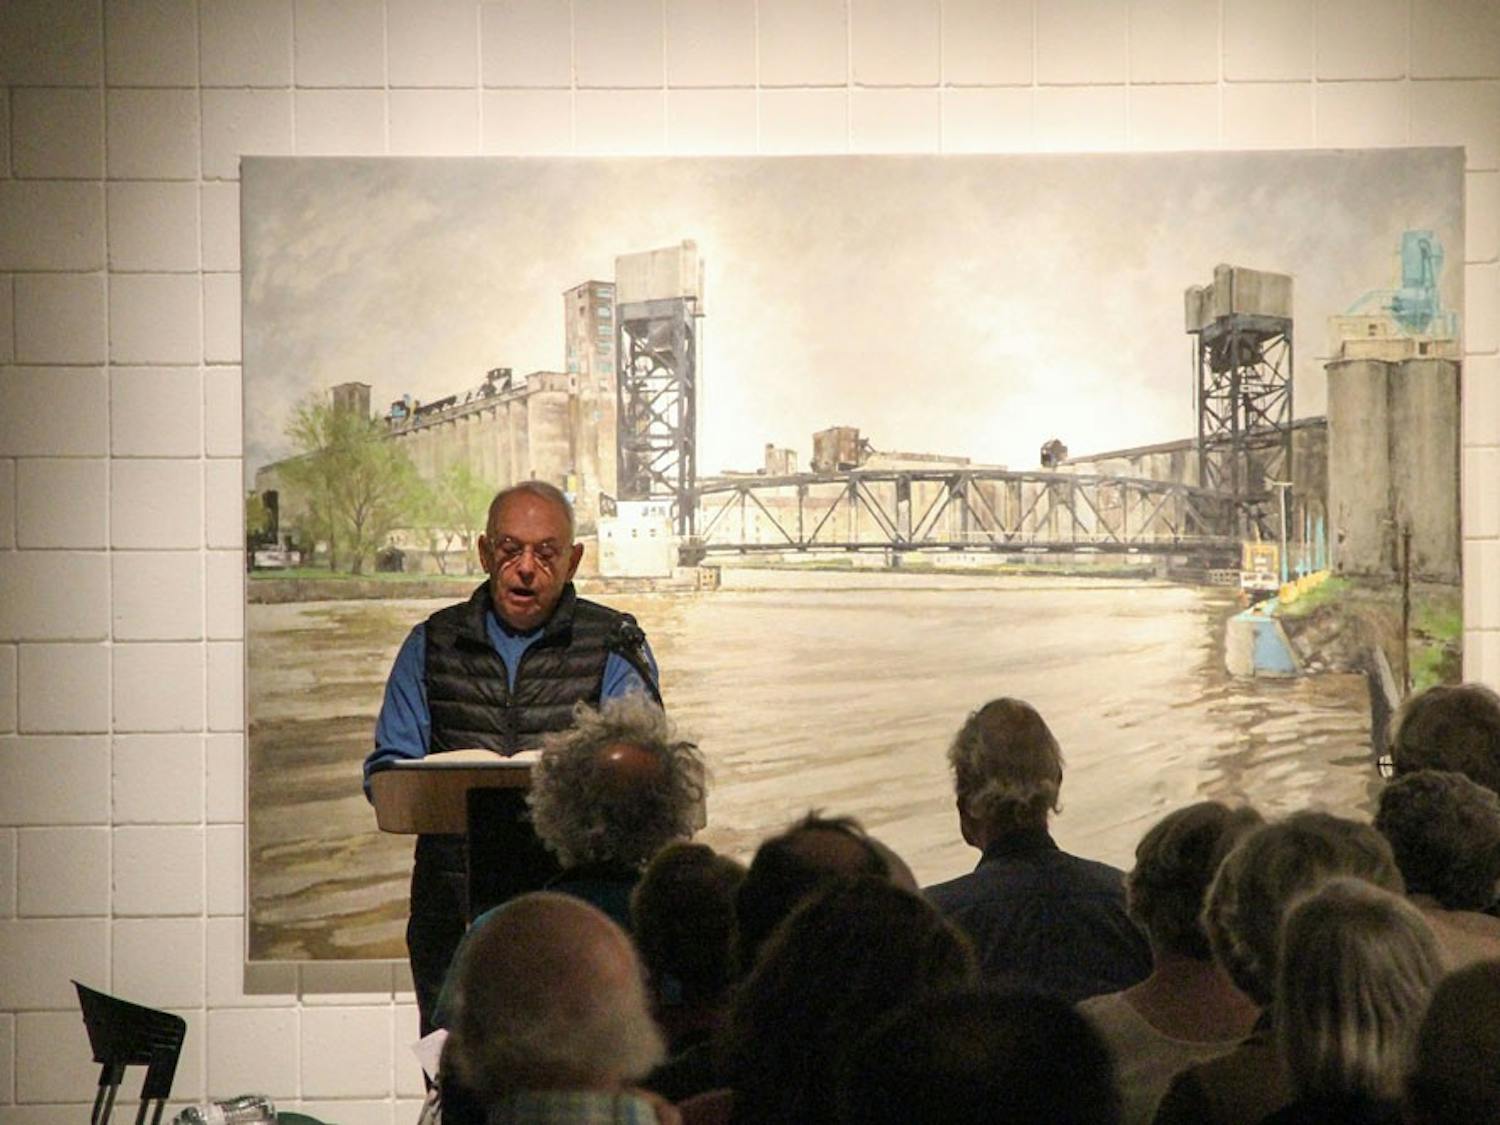 This past Thursday, Irving Feldman (pictured) returned to Buffalo to read his poetry at the Anderson Art Gallery. The artist, a former UB english department professor well-known for fostering creativity amongst his students, read his poetry and talked about the changing attitude towards arts and poetry.